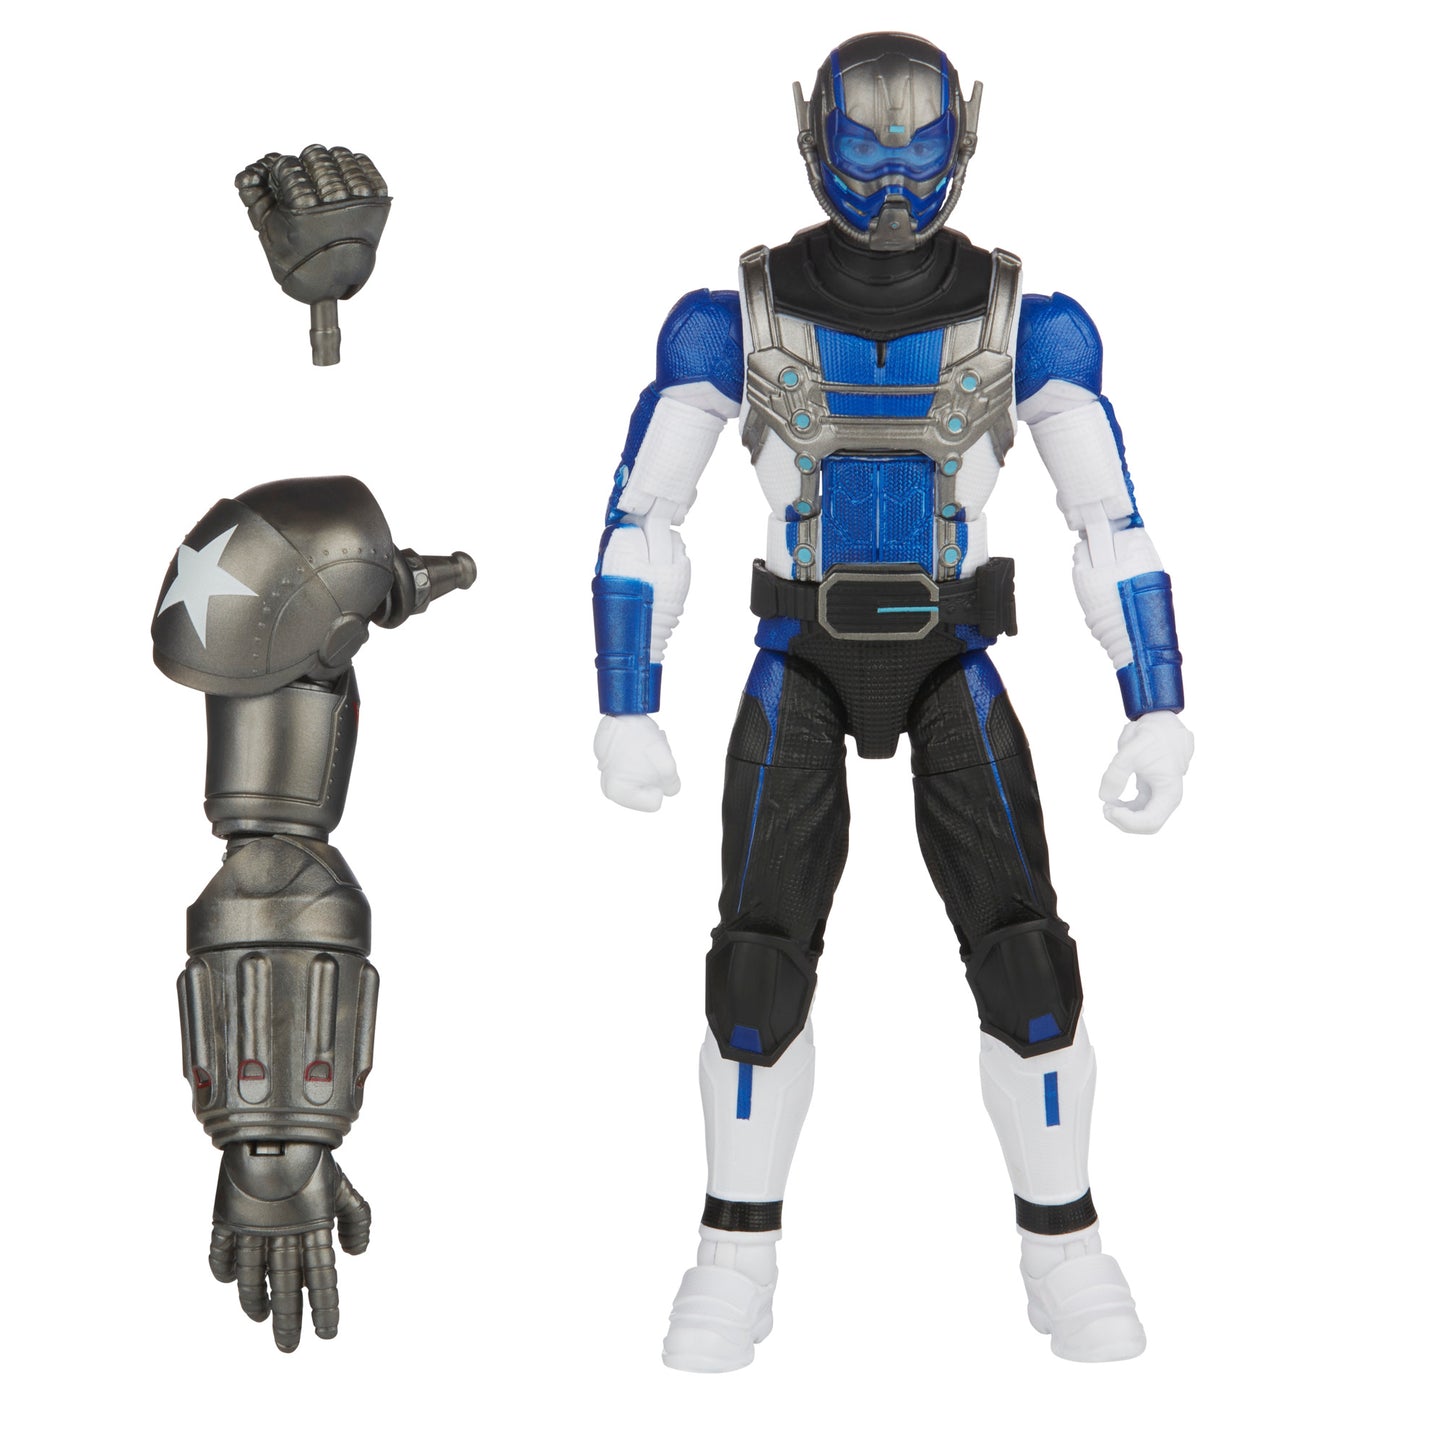 Marvel Legends Series Marvel’s Goliath Action Figure 6-Inch Toy with accessories - Heretoserveyou